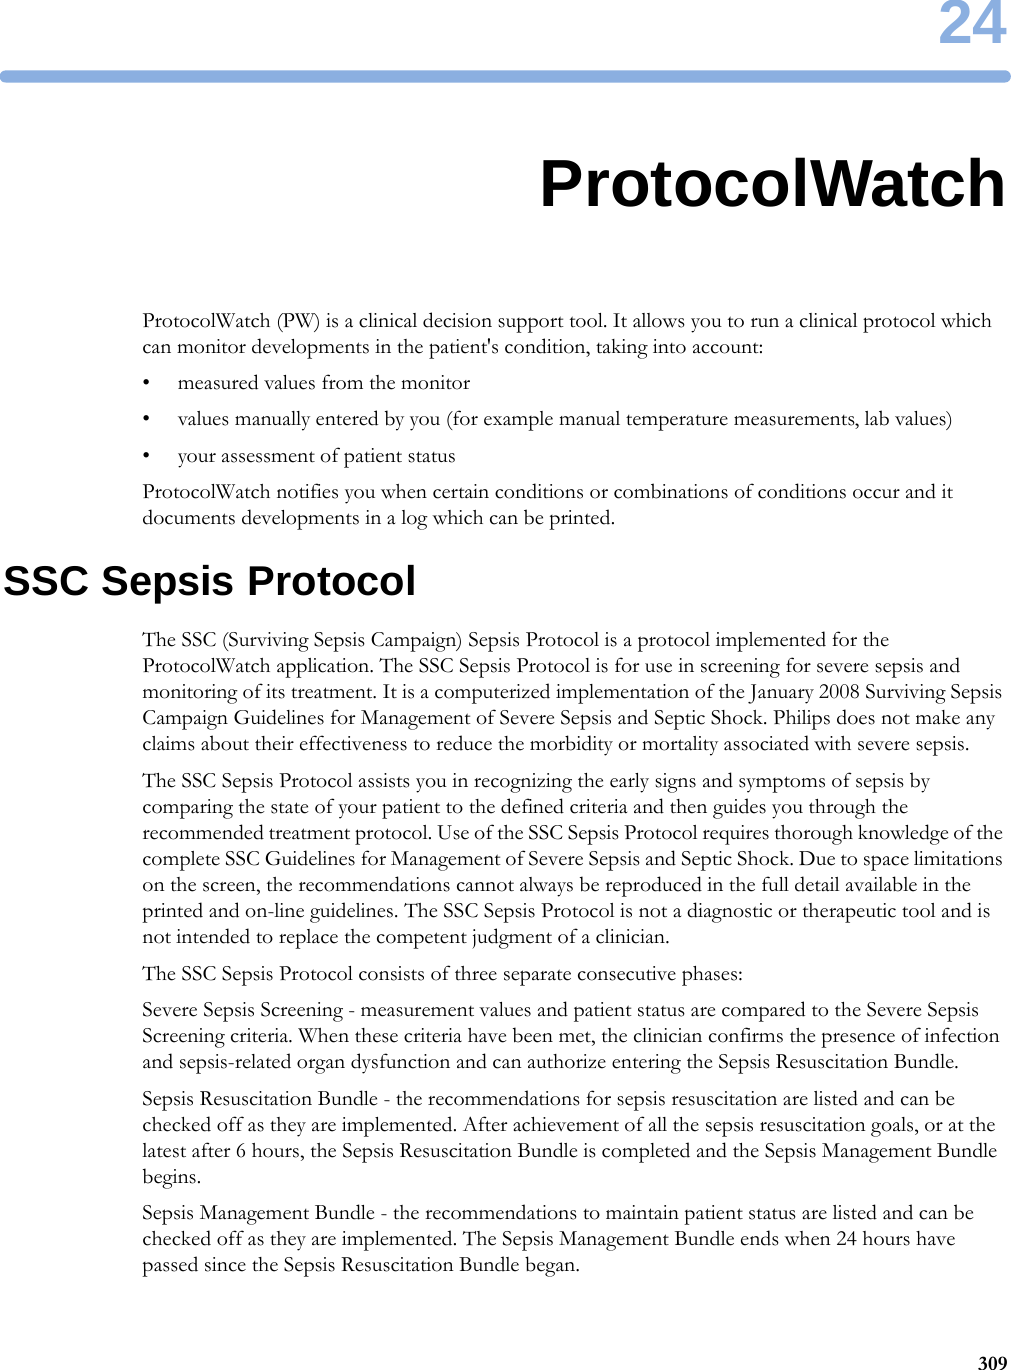 2430924ProtocolWatchProtocolWatch (PW) is a clinical decision support tool. It allows you to run a clinical protocol which can monitor developments in the patient&apos;s condition, taking into account:• measured values from the monitor• values manually entered by you (for example manual temperature measurements, lab values)• your assessment of patient statusProtocolWatch notifies you when certain conditions or combinations of conditions occur and it documents developments in a log which can be printed.SSC Sepsis ProtocolThe SSC (Surviving Sepsis Campaign) Sepsis Protocol is a protocol implemented for the ProtocolWatch application. The SSC Sepsis Protocol is for use in screening for severe sepsis and monitoring of its treatment. It is a computerized implementation of the January 2008 Surviving Sepsis Campaign Guidelines for Management of Severe Sepsis and Septic Shock. Philips does not make any claims about their effectiveness to reduce the morbidity or mortality associated with severe sepsis.The SSC Sepsis Protocol assists you in recognizing the early signs and symptoms of sepsis by comparing the state of your patient to the defined criteria and then guides you through the recommended treatment protocol. Use of the SSC Sepsis Protocol requires thorough knowledge of the complete SSC Guidelines for Management of Severe Sepsis and Septic Shock. Due to space limitations on the screen, the recommendations cannot always be reproduced in the full detail available in the printed and on-line guidelines. The SSC Sepsis Protocol is not a diagnostic or therapeutic tool and is not intended to replace the competent judgment of a clinician.The SSC Sepsis Protocol consists of three separate consecutive phases:Severe Sepsis Screening - measurement values and patient status are compared to the Severe Sepsis Screening criteria. When these criteria have been met, the clinician confirms the presence of infection and sepsis-related organ dysfunction and can authorize entering the Sepsis Resuscitation Bundle.Sepsis Resuscitation Bundle - the recommendations for sepsis resuscitation are listed and can be checked off as they are implemented. After achievement of all the sepsis resuscitation goals, or at the latest after 6 hours, the Sepsis Resuscitation Bundle is completed and the Sepsis Management Bundle begins.Sepsis Management Bundle - the recommendations to maintain patient status are listed and can be checked off as they are implemented. The Sepsis Management Bundle ends when 24 hours have passed since the Sepsis Resuscitation Bundle began.